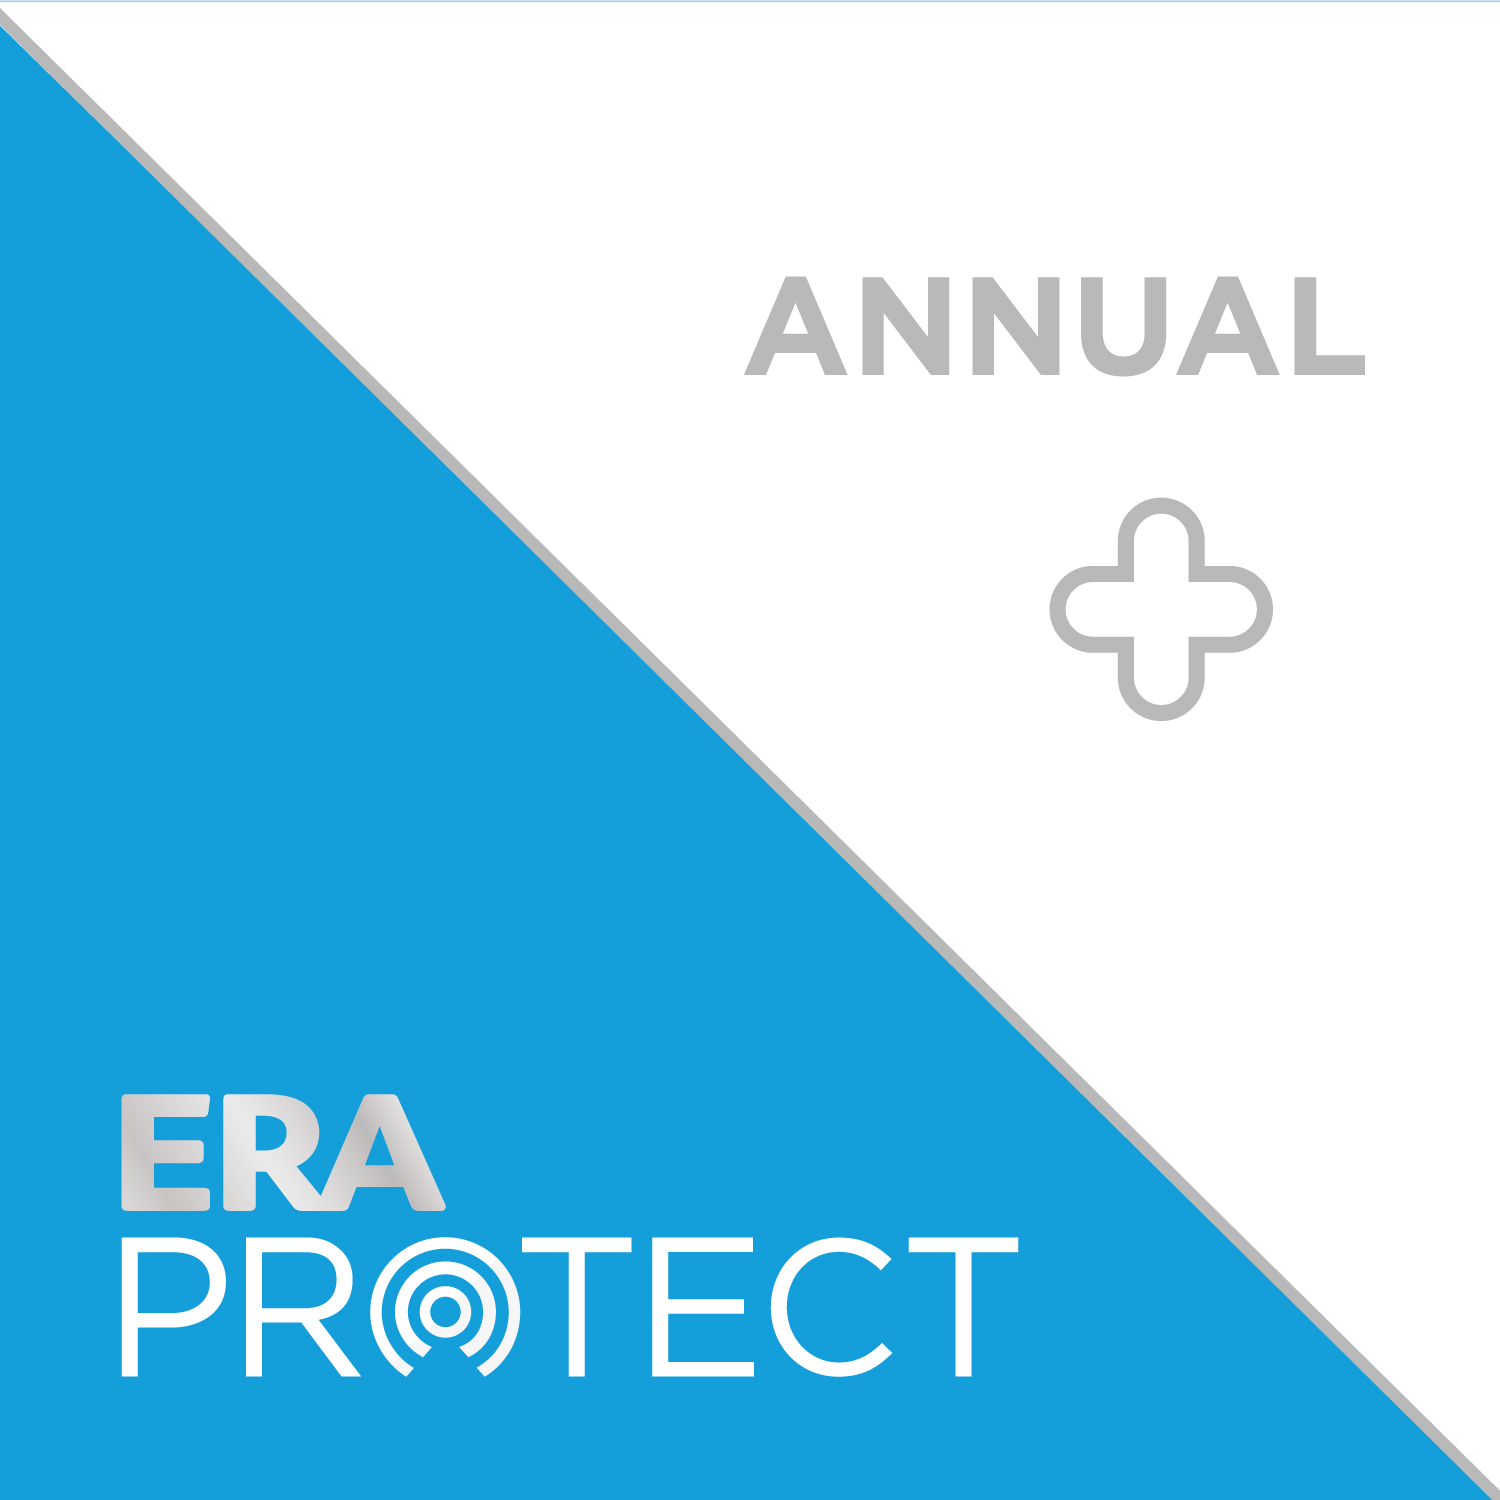 ERA Protect Plus Subscription Package, Annual (12 months)